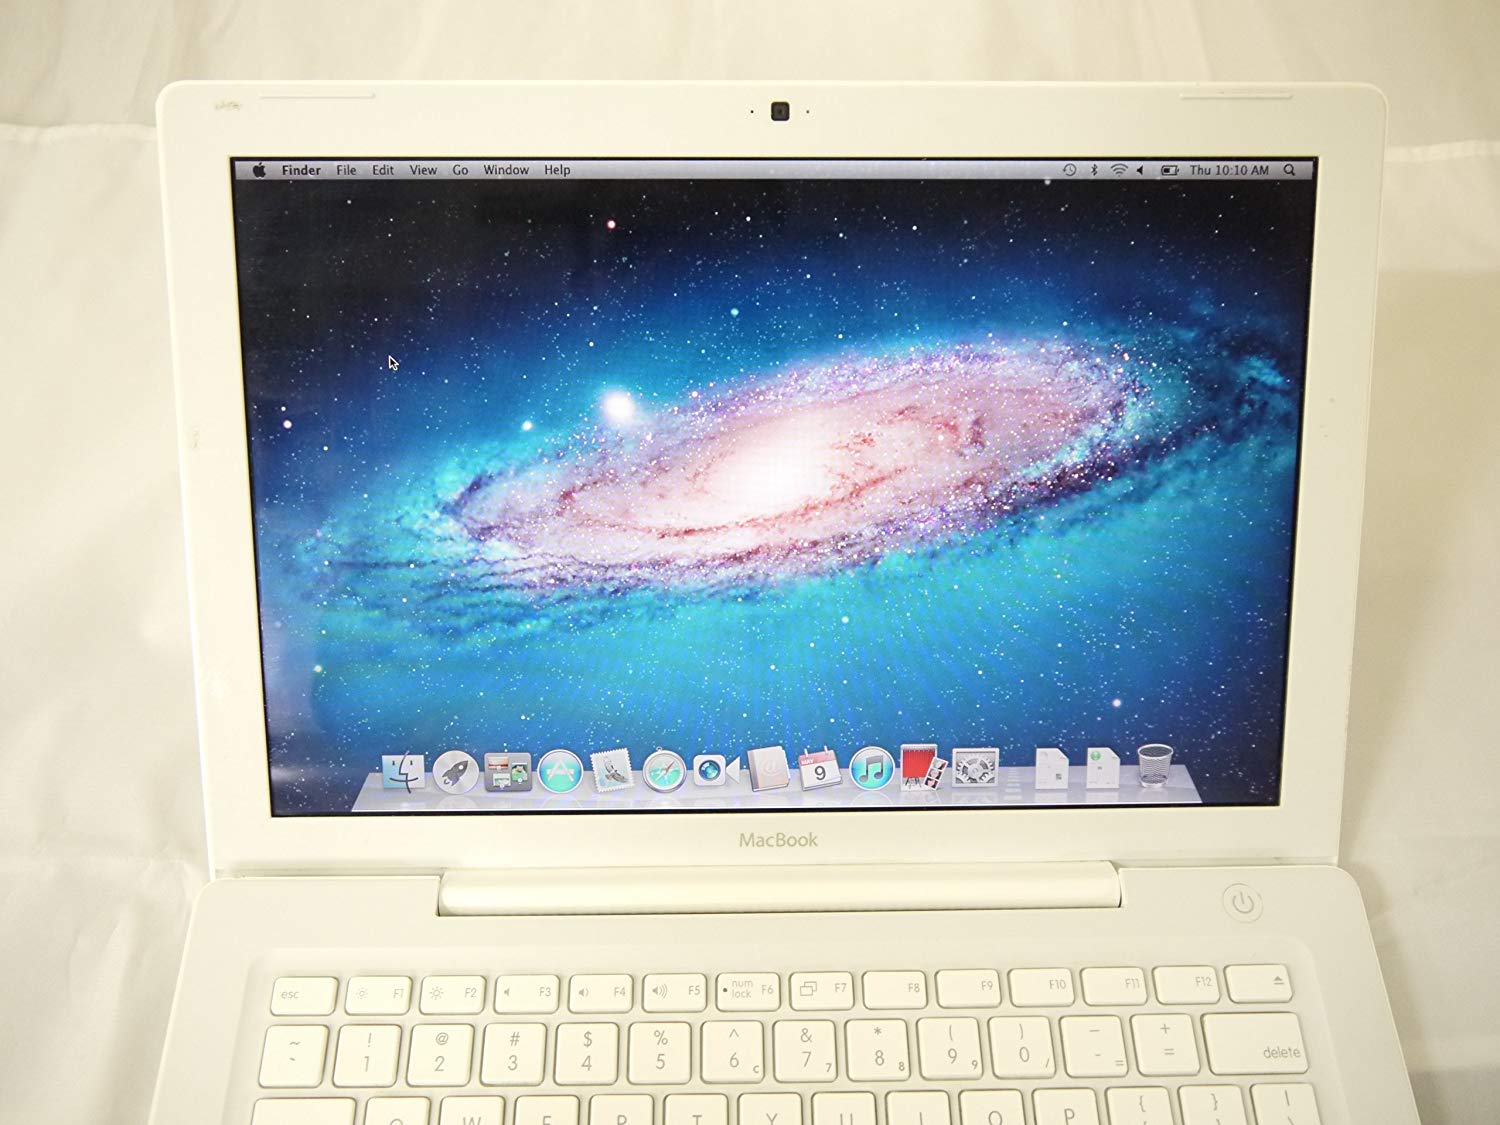 macbook a1181 sound drivers for windows 7